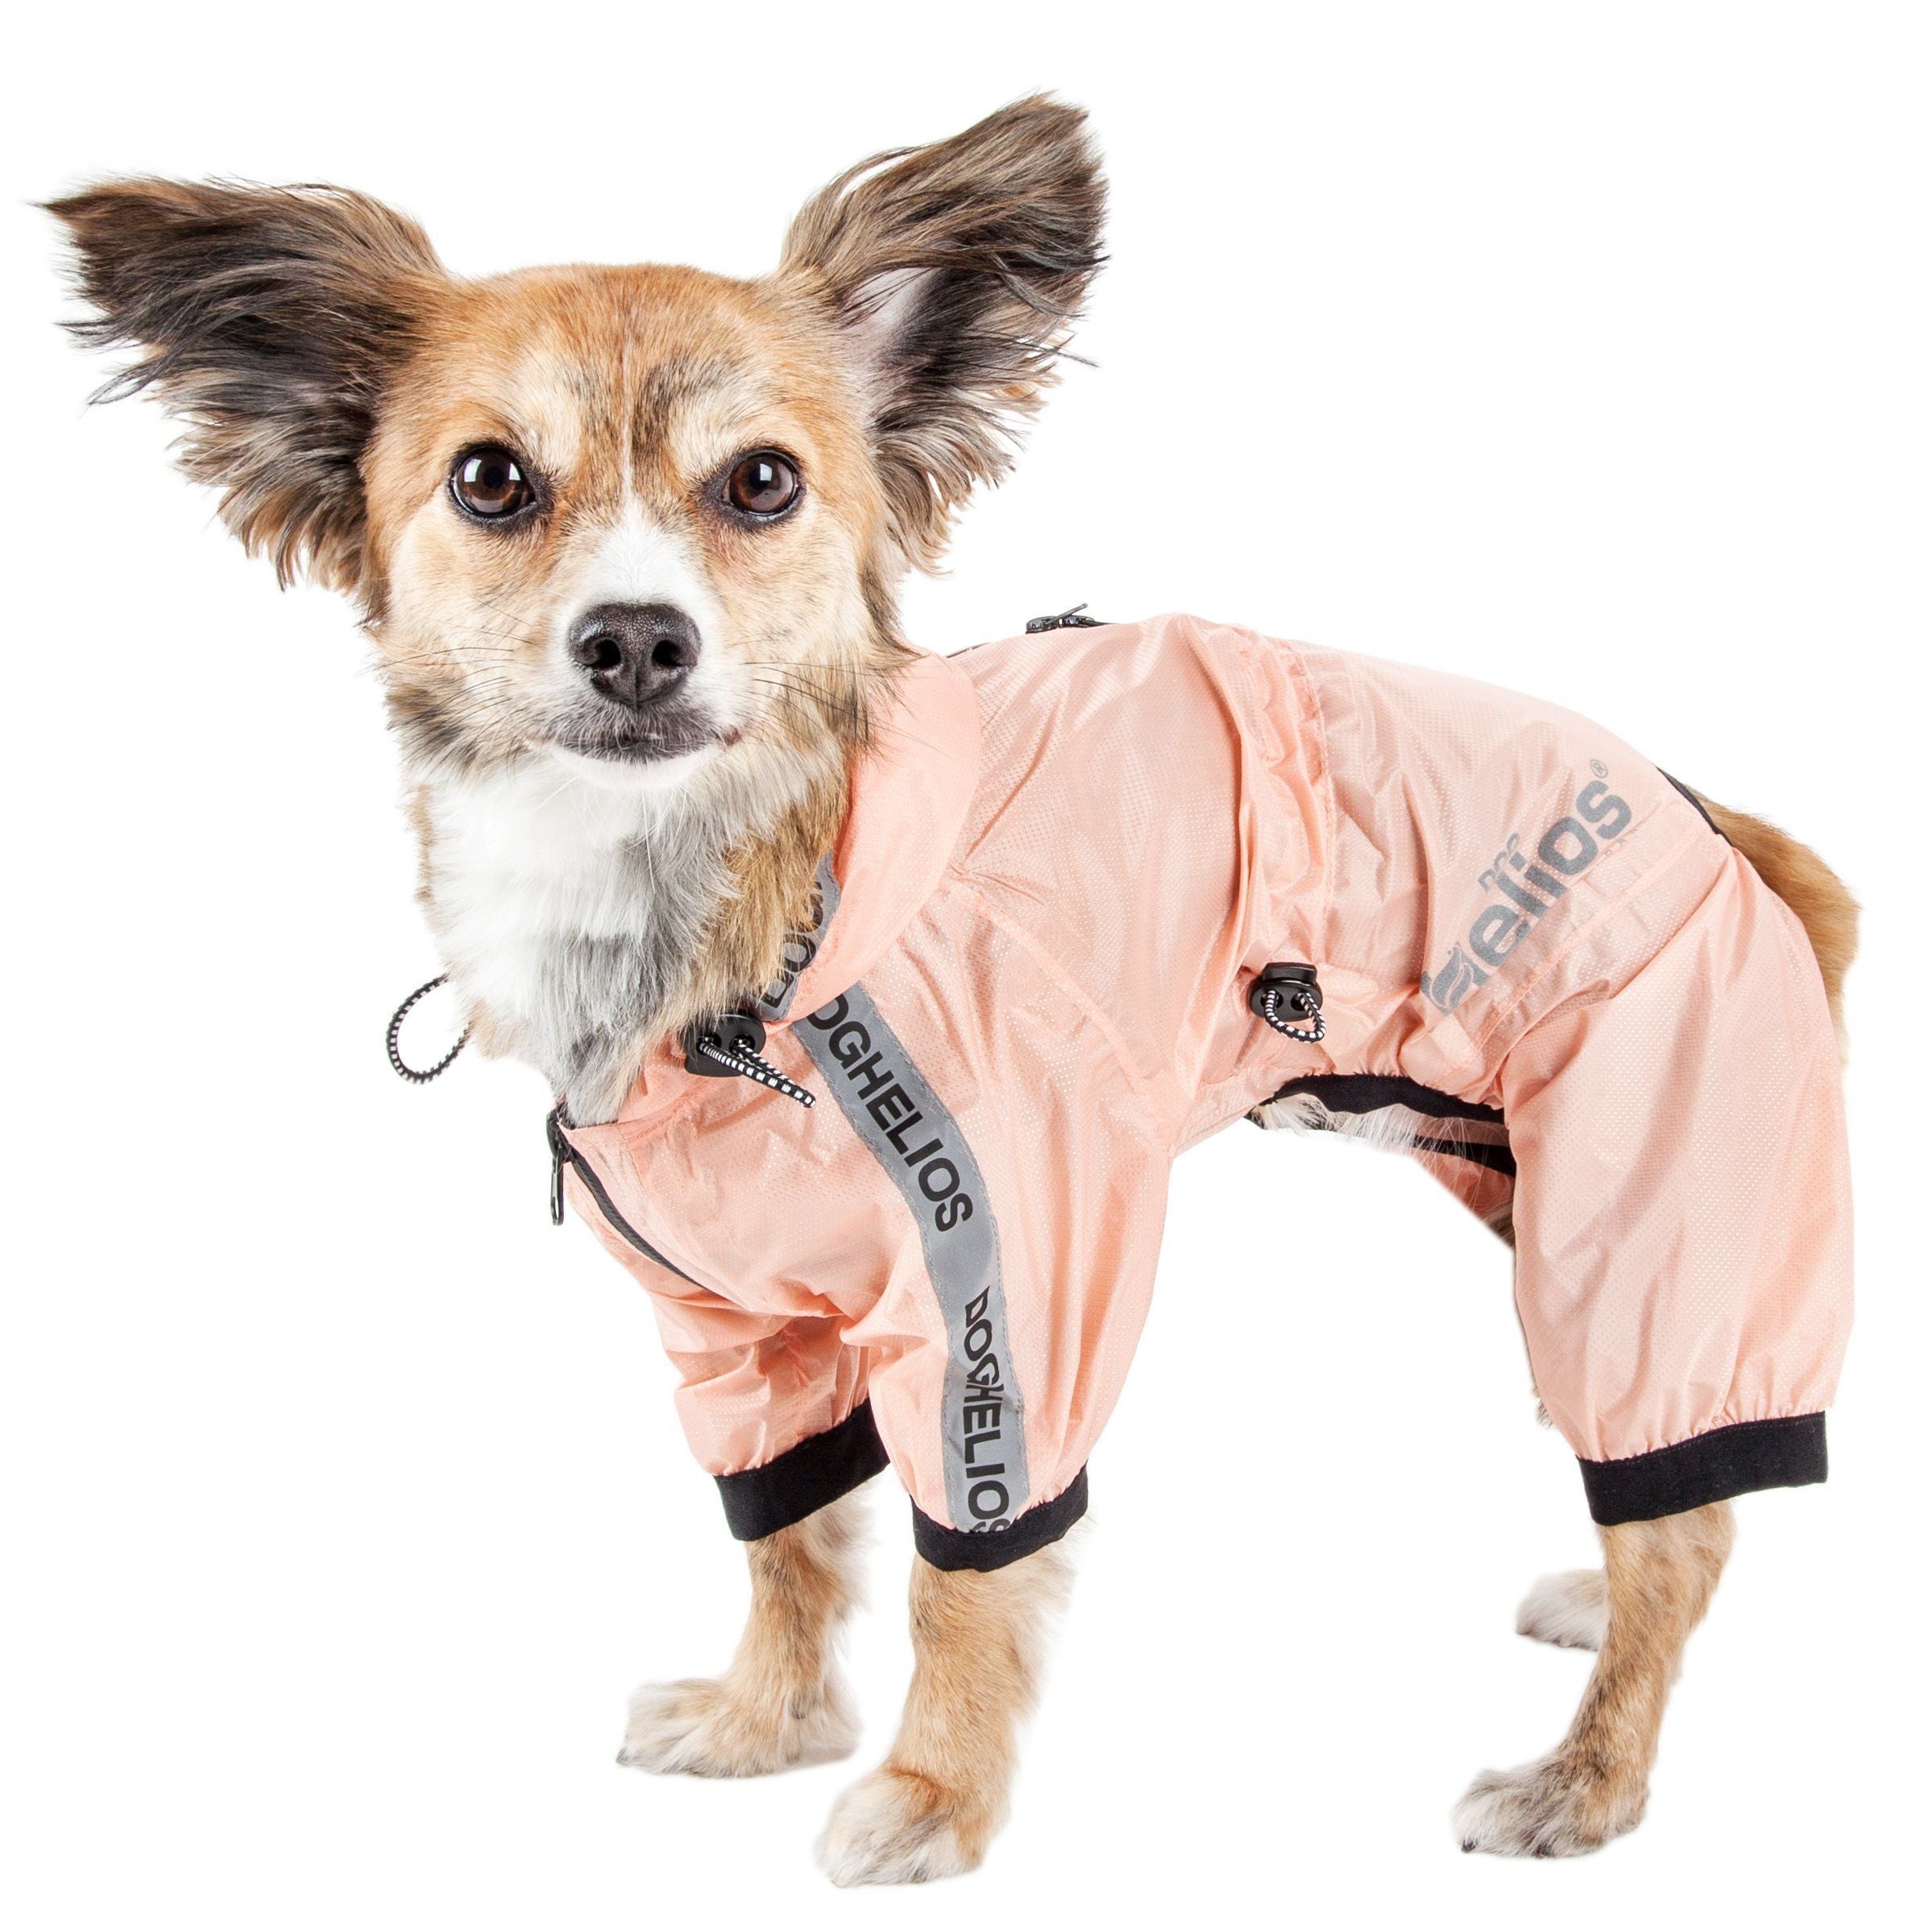 Dog Helios ® 'Torrential Shield' Waterproof and Adjustable Full Body Dog Raincoat X-Small Peach